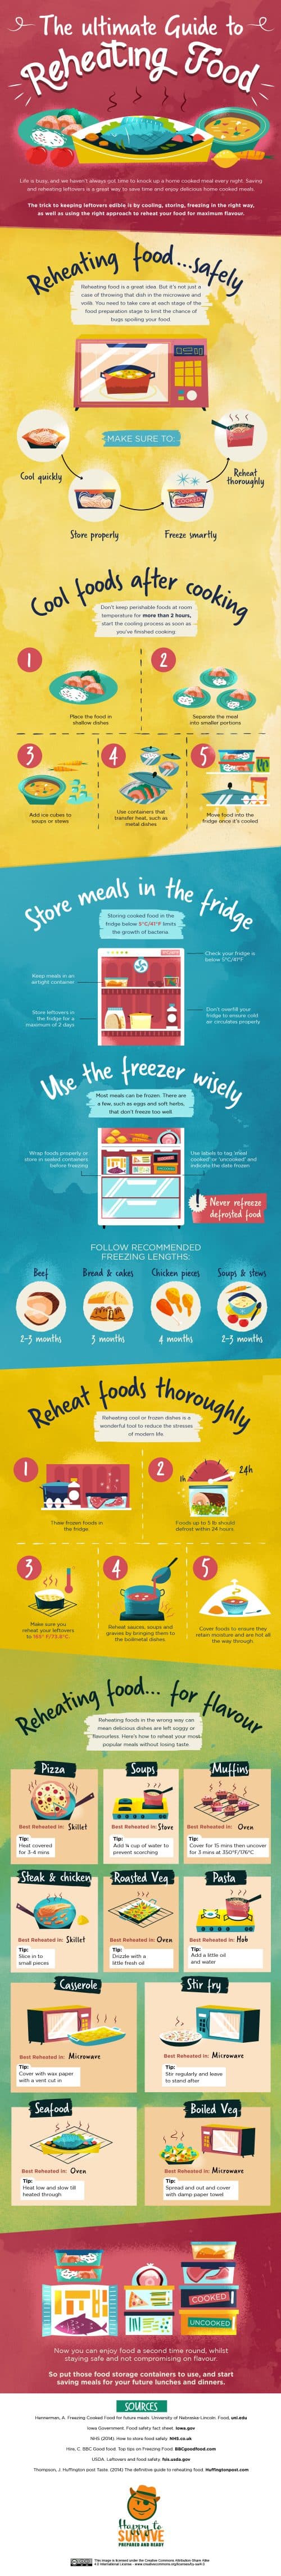 Safely Reheating Food Infographic for Weight Watchers everywhere